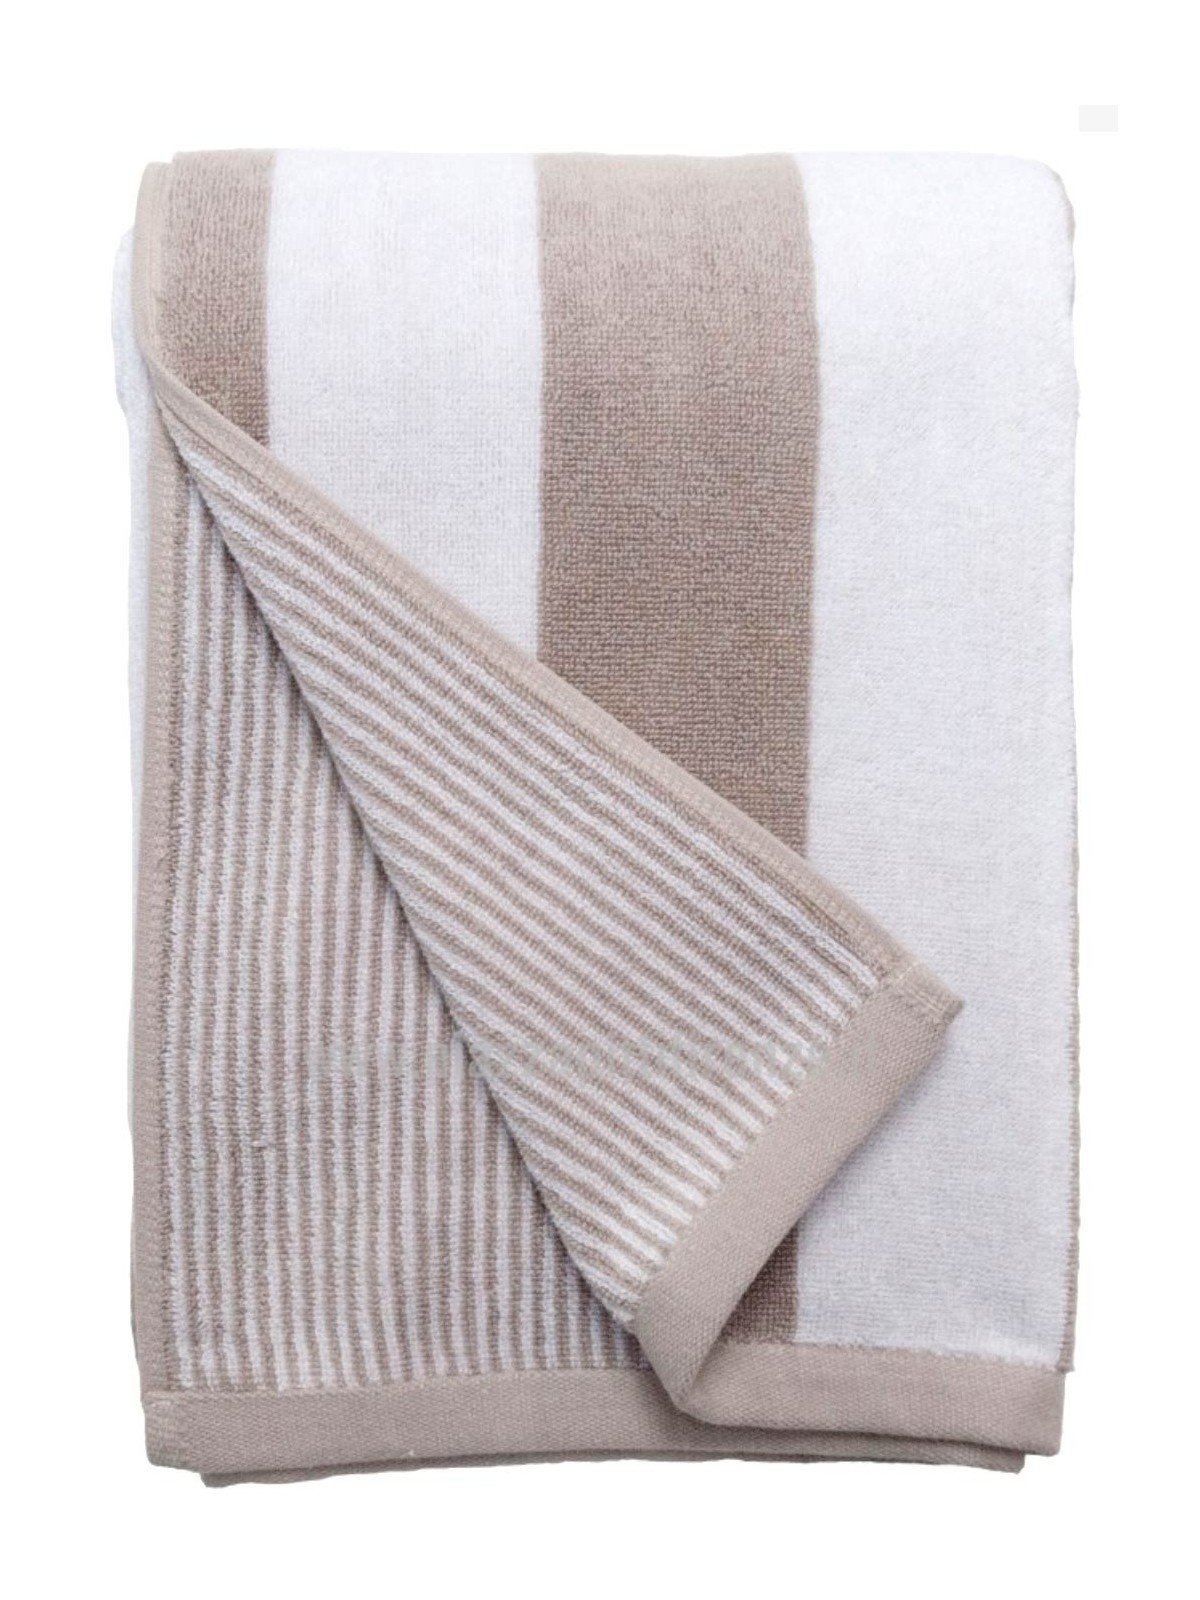 Doubleface Striped Sponge Towels Shabby Chic Righine - Lumiere